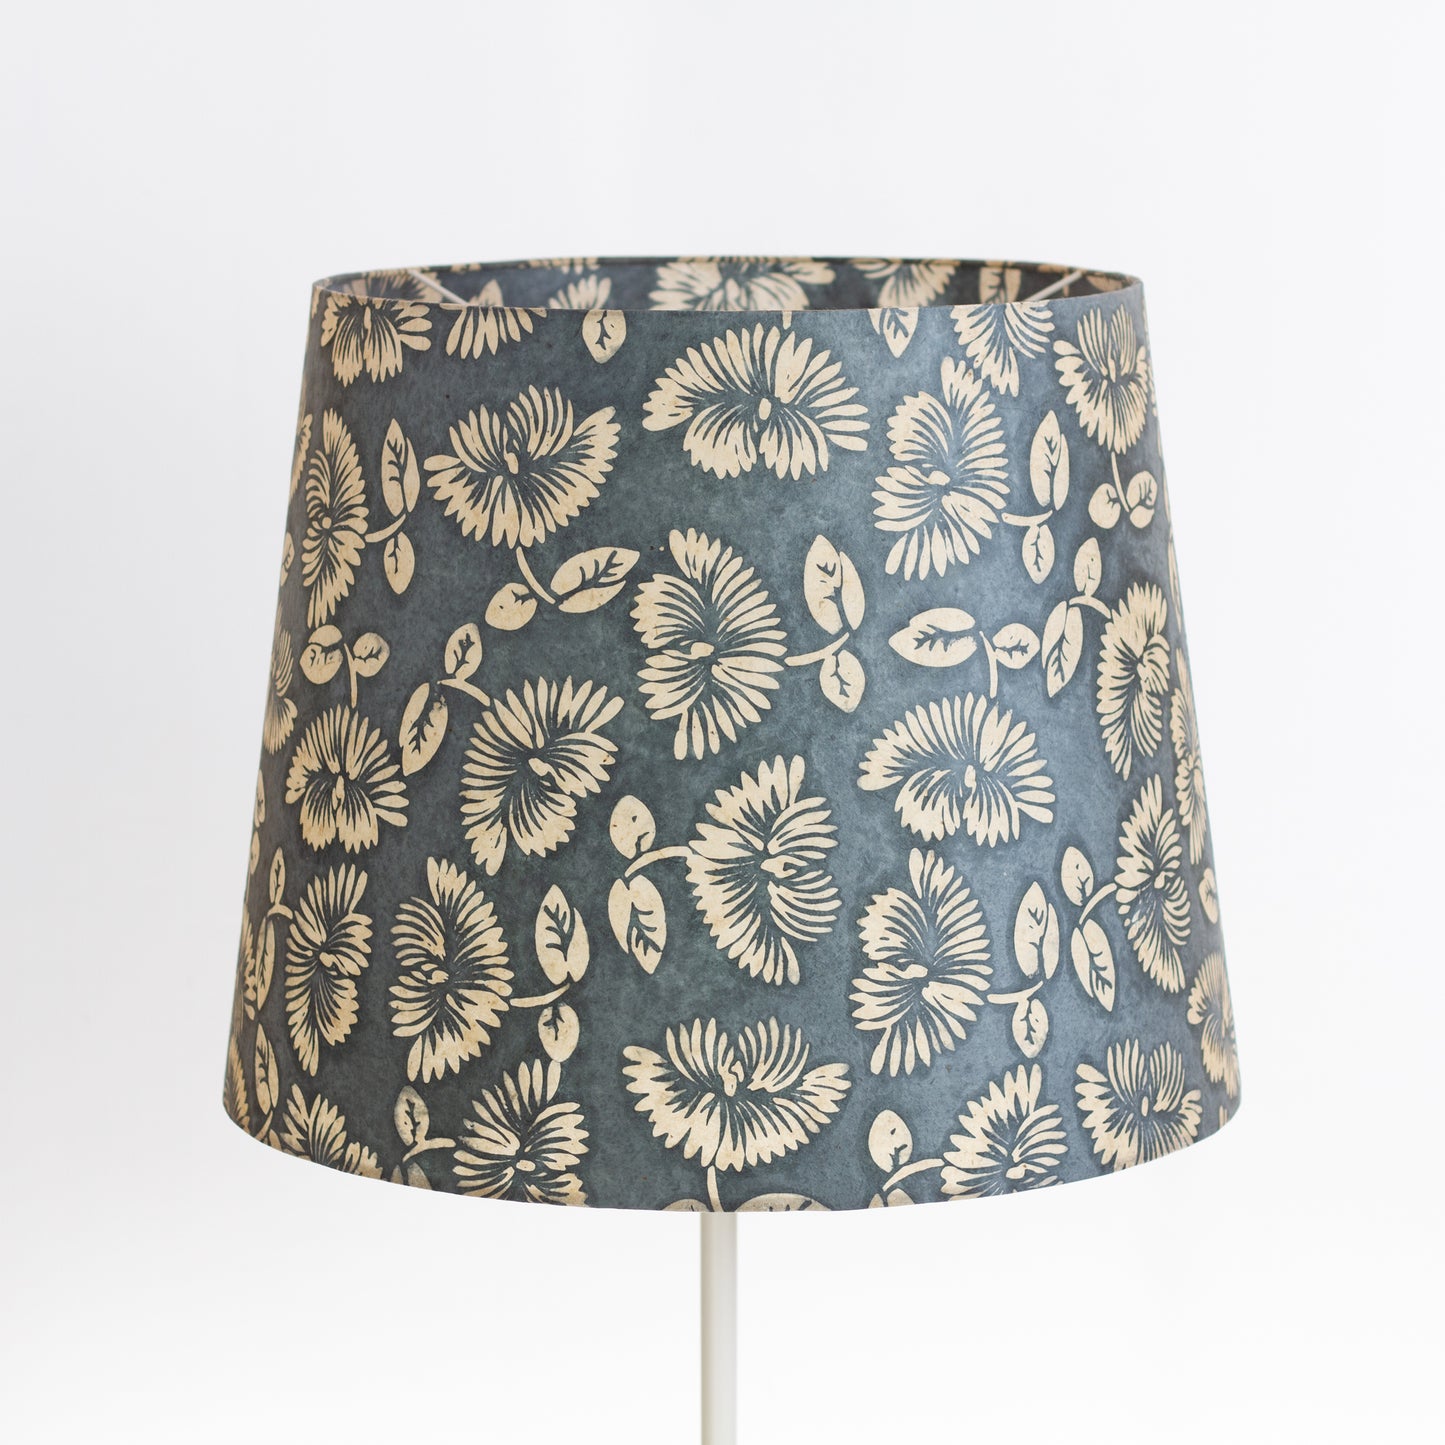 Extra Large Conical Lampshade 40cm(top) x 40cm(bottom) x 50cm(height) in B119 Batik Peony Grey